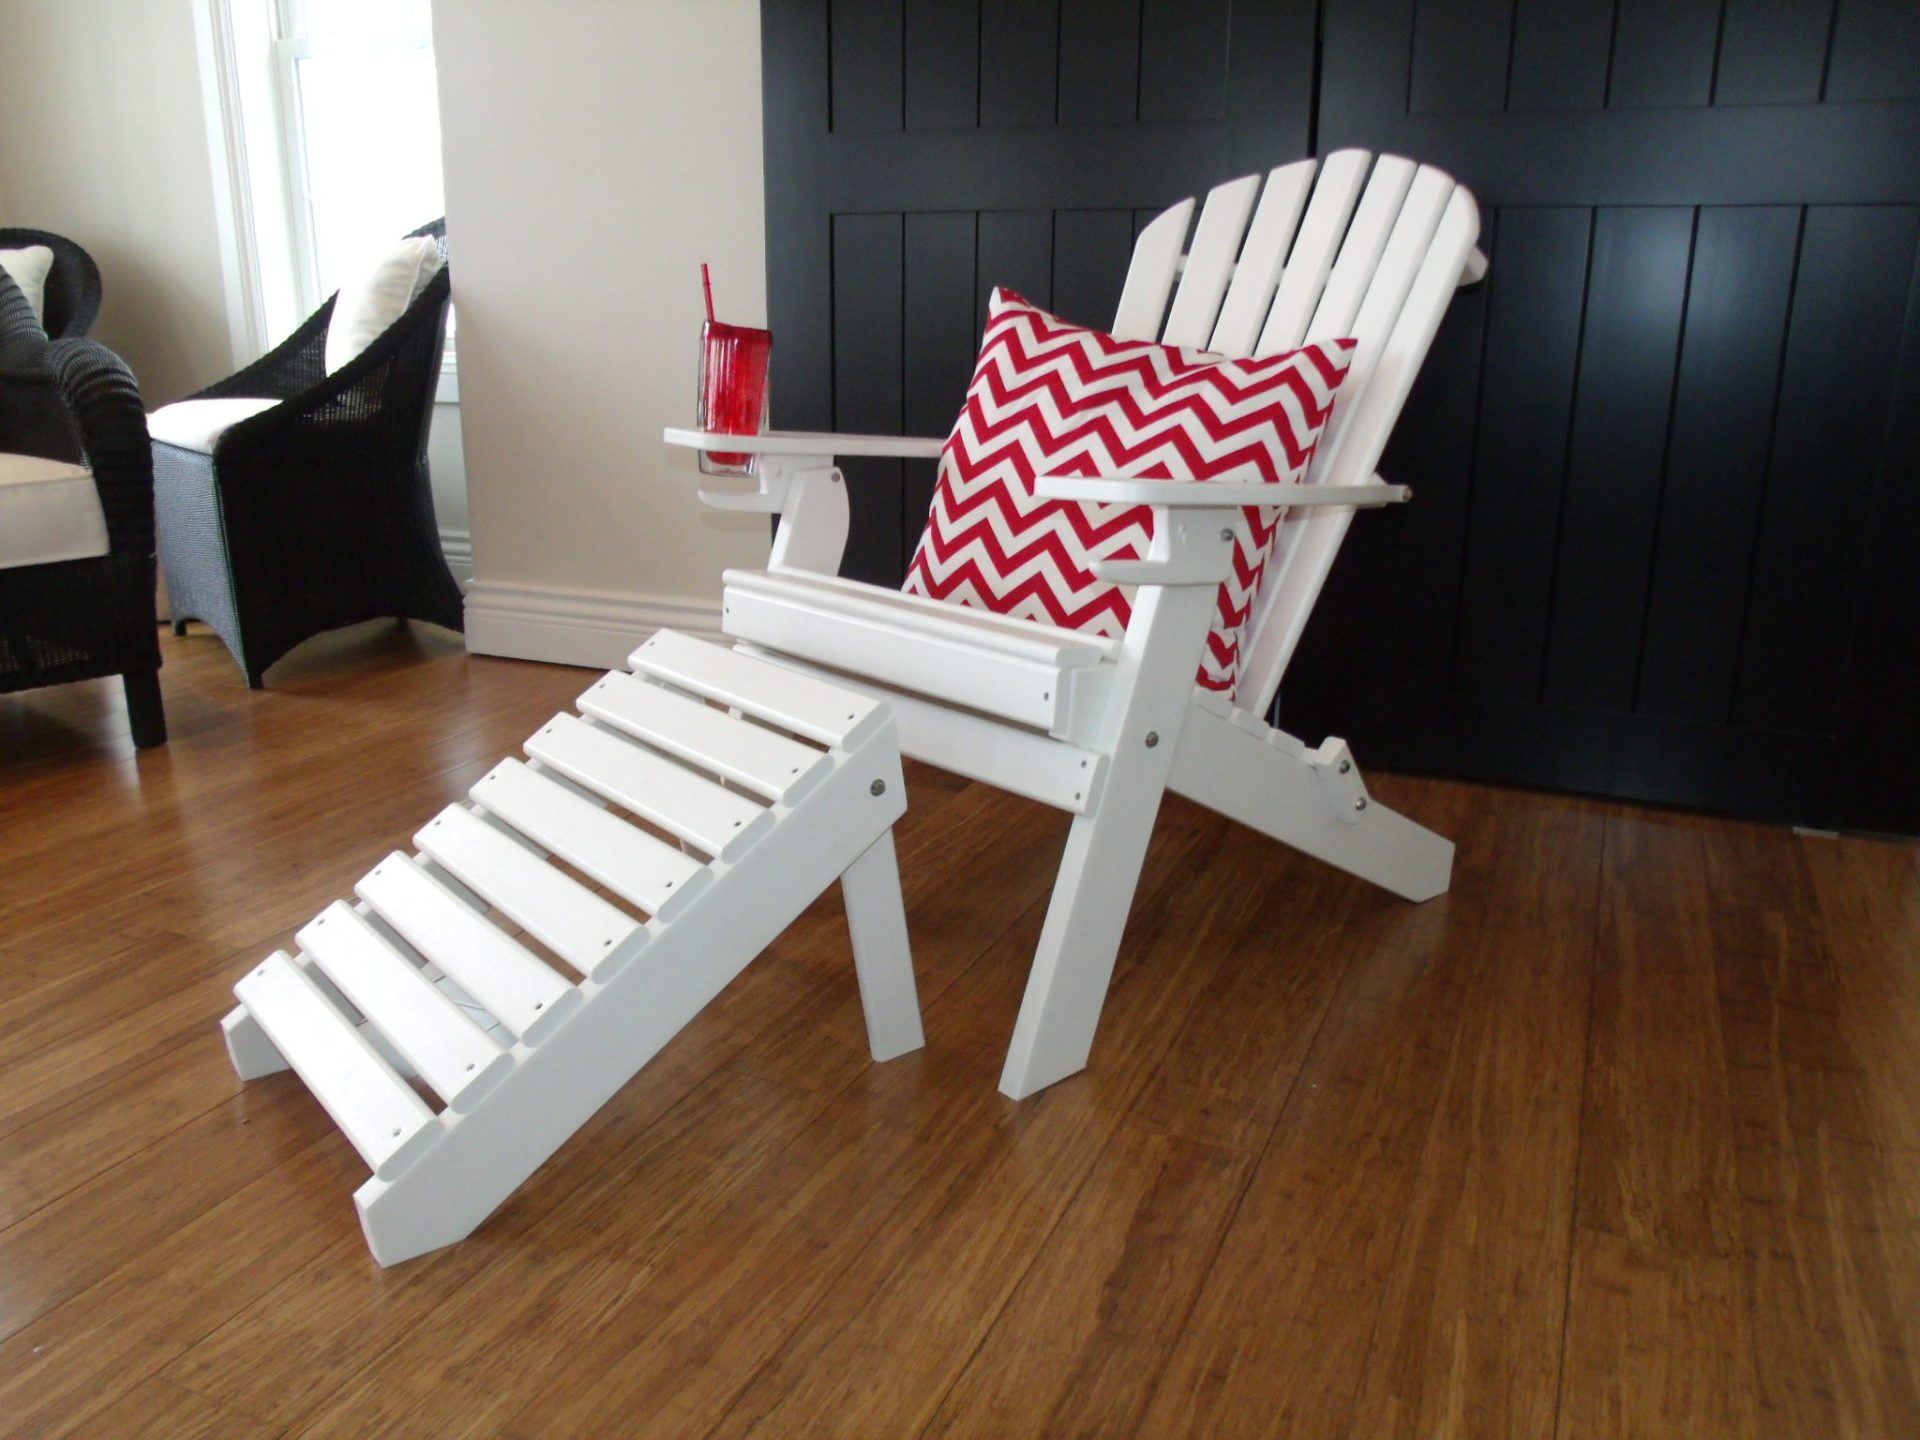 Basic 7 Slat Adirondack Chairs with 2 cup holders